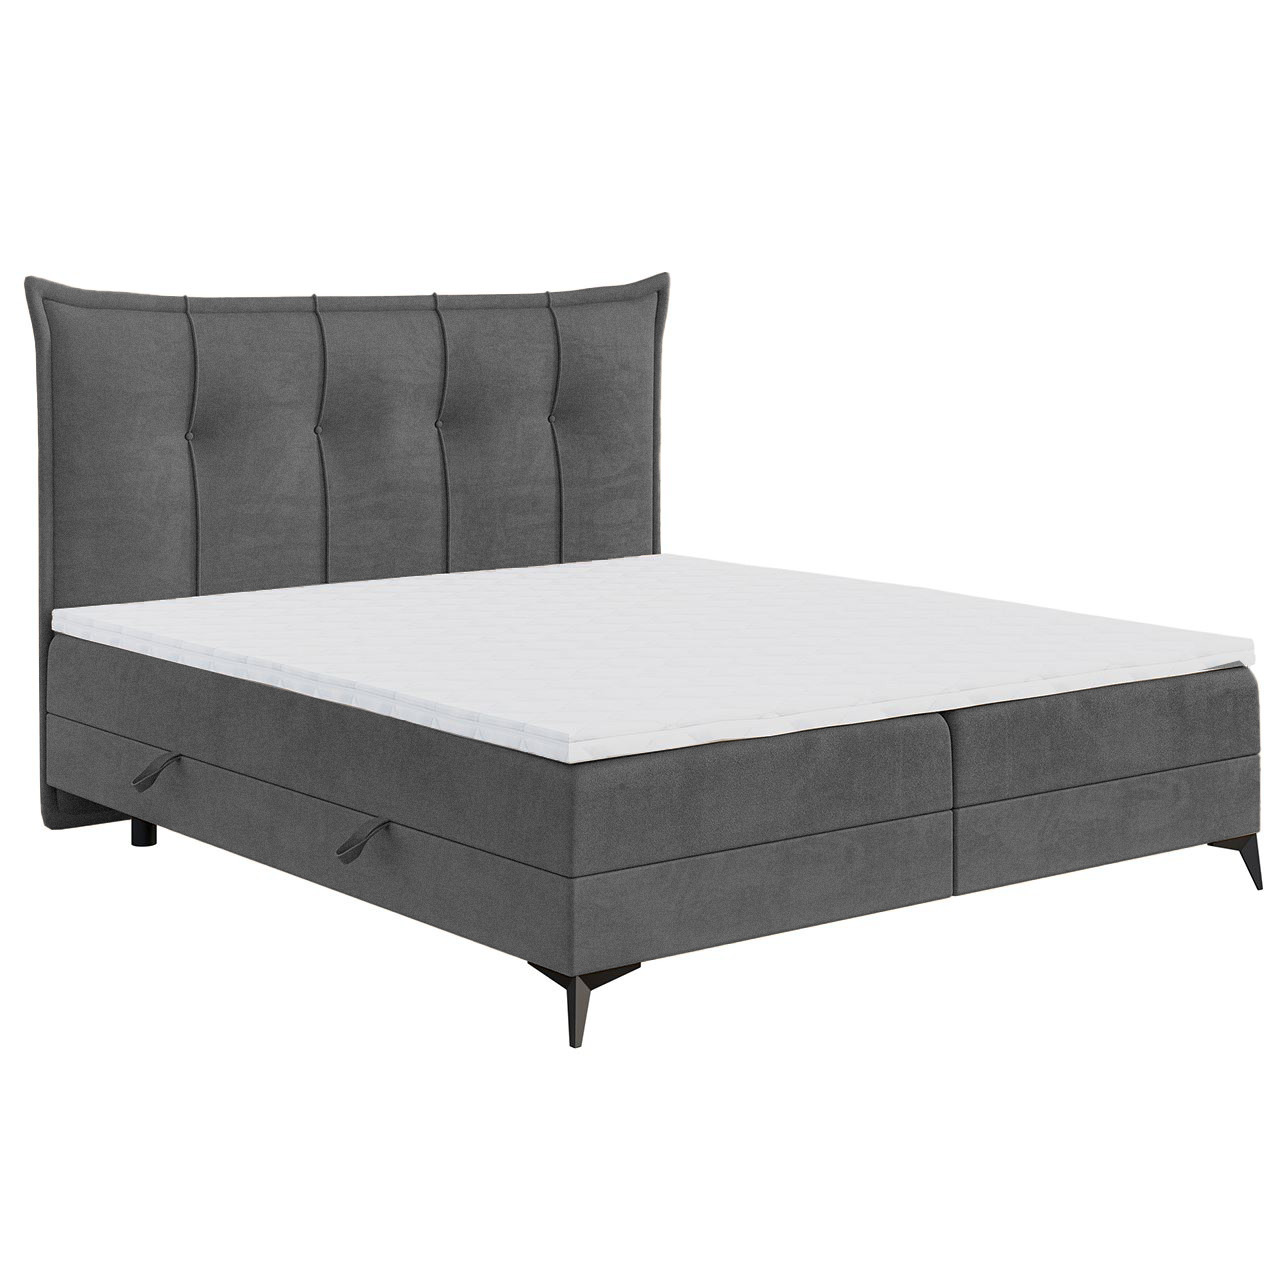 Upholstered bed FOX 120x200 monolith 92